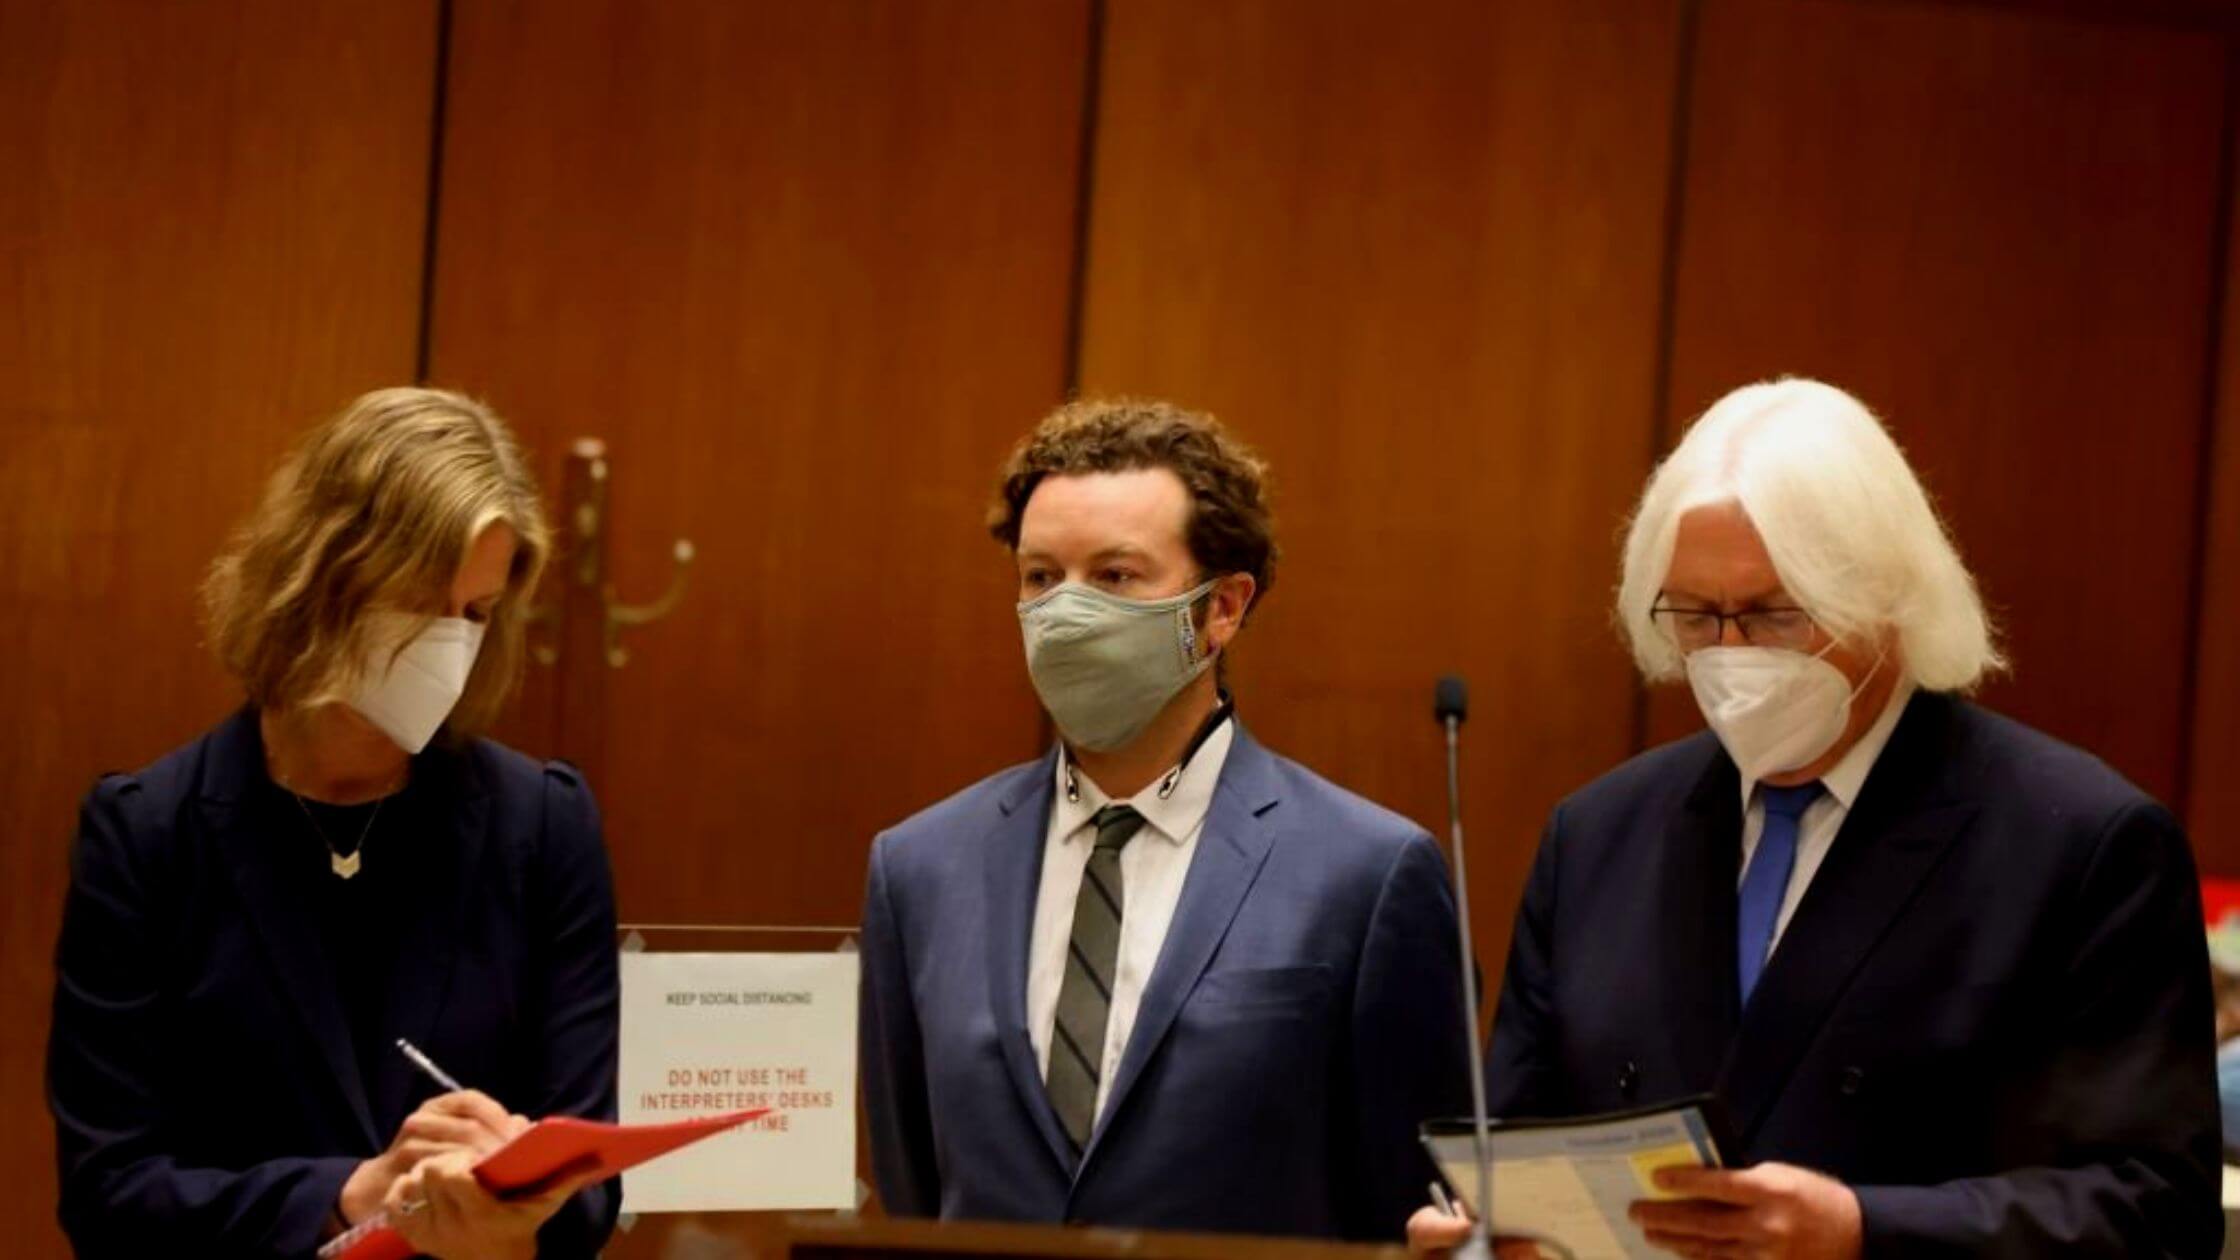 The Case Against Danny Masterson For Rape Ends In A Mistrial